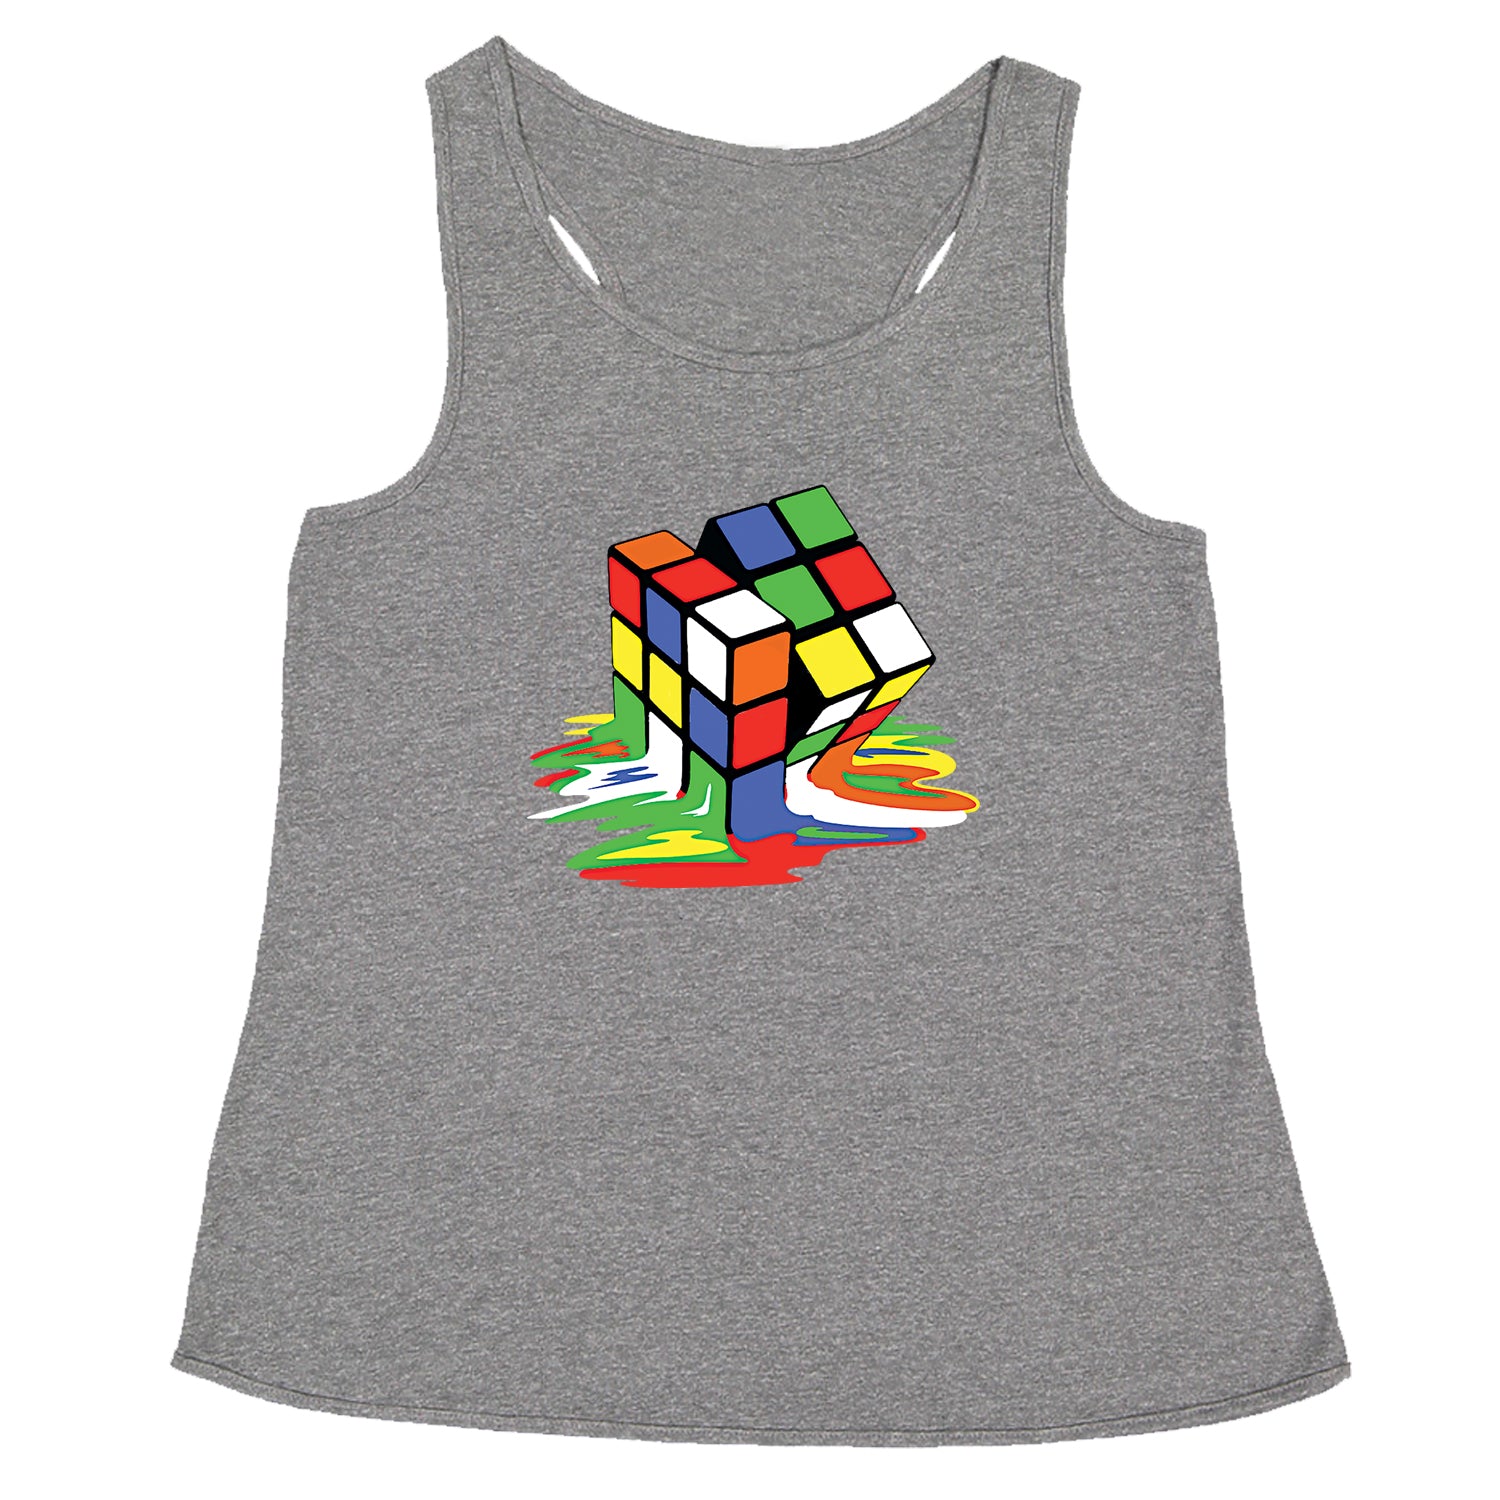 Melting Multi-Colored Cube Racerback Tank Top for Women gamer, gaming, nerd, shirt by Expression Tees